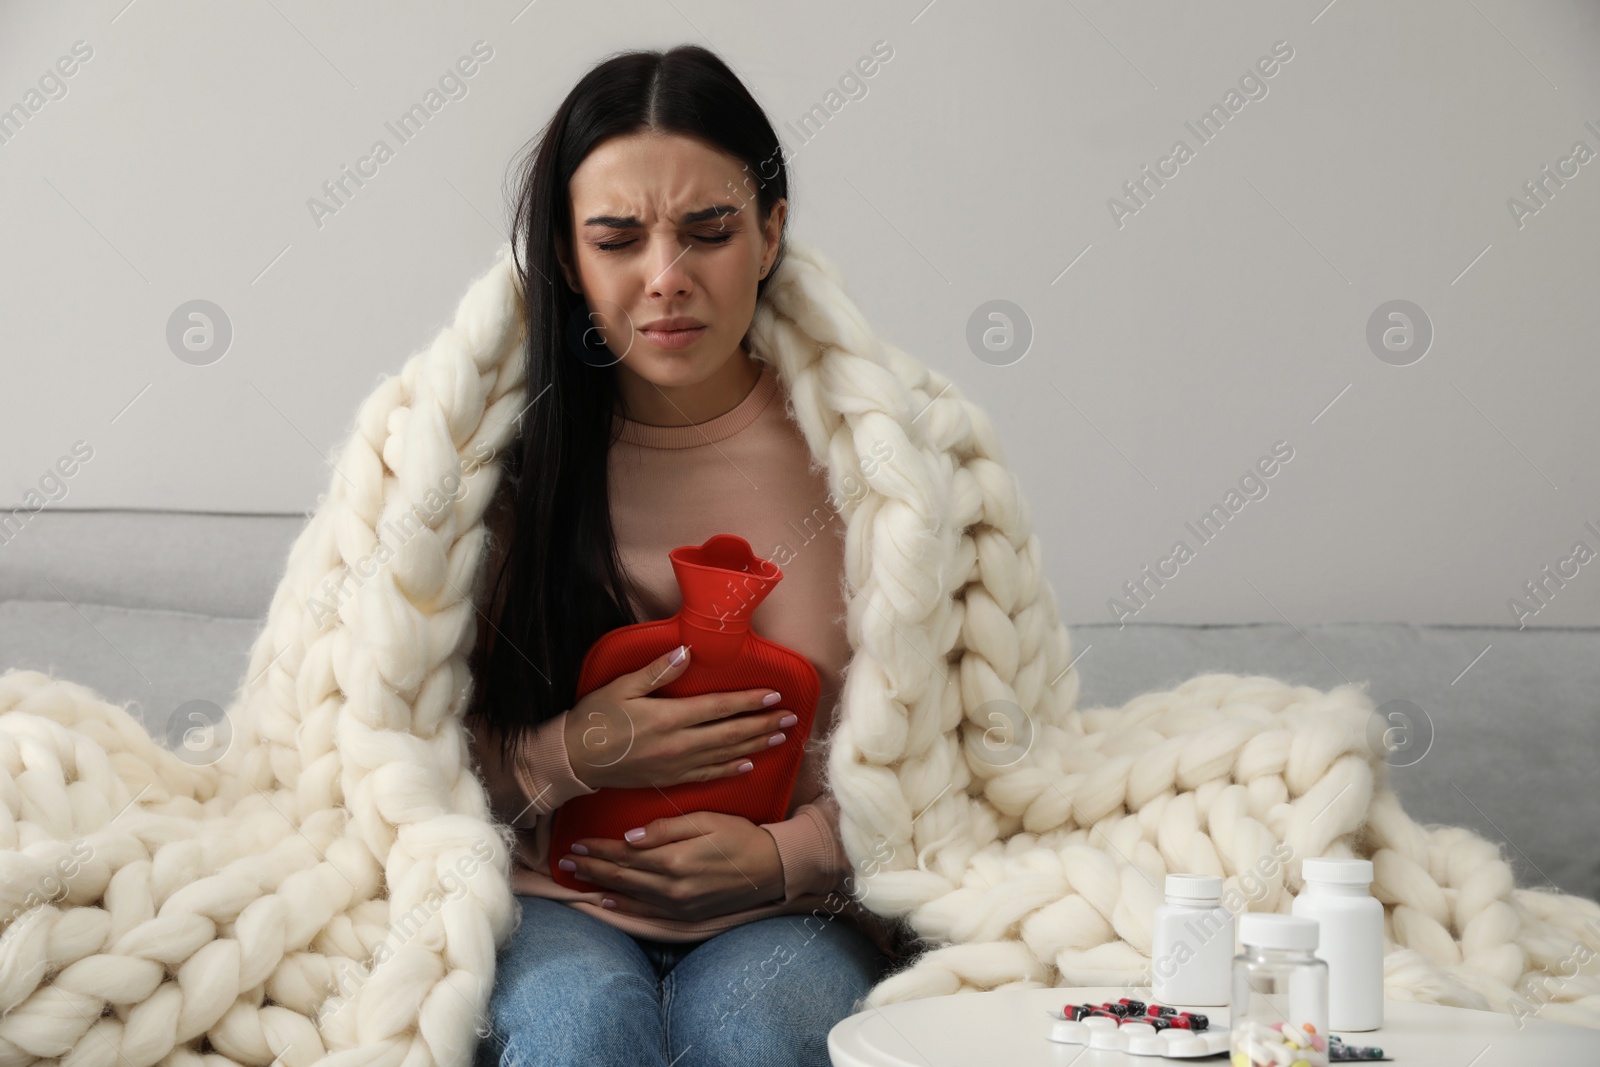 Photo of Woman using hot water bottle to relieve abdominal pain on sofa at home